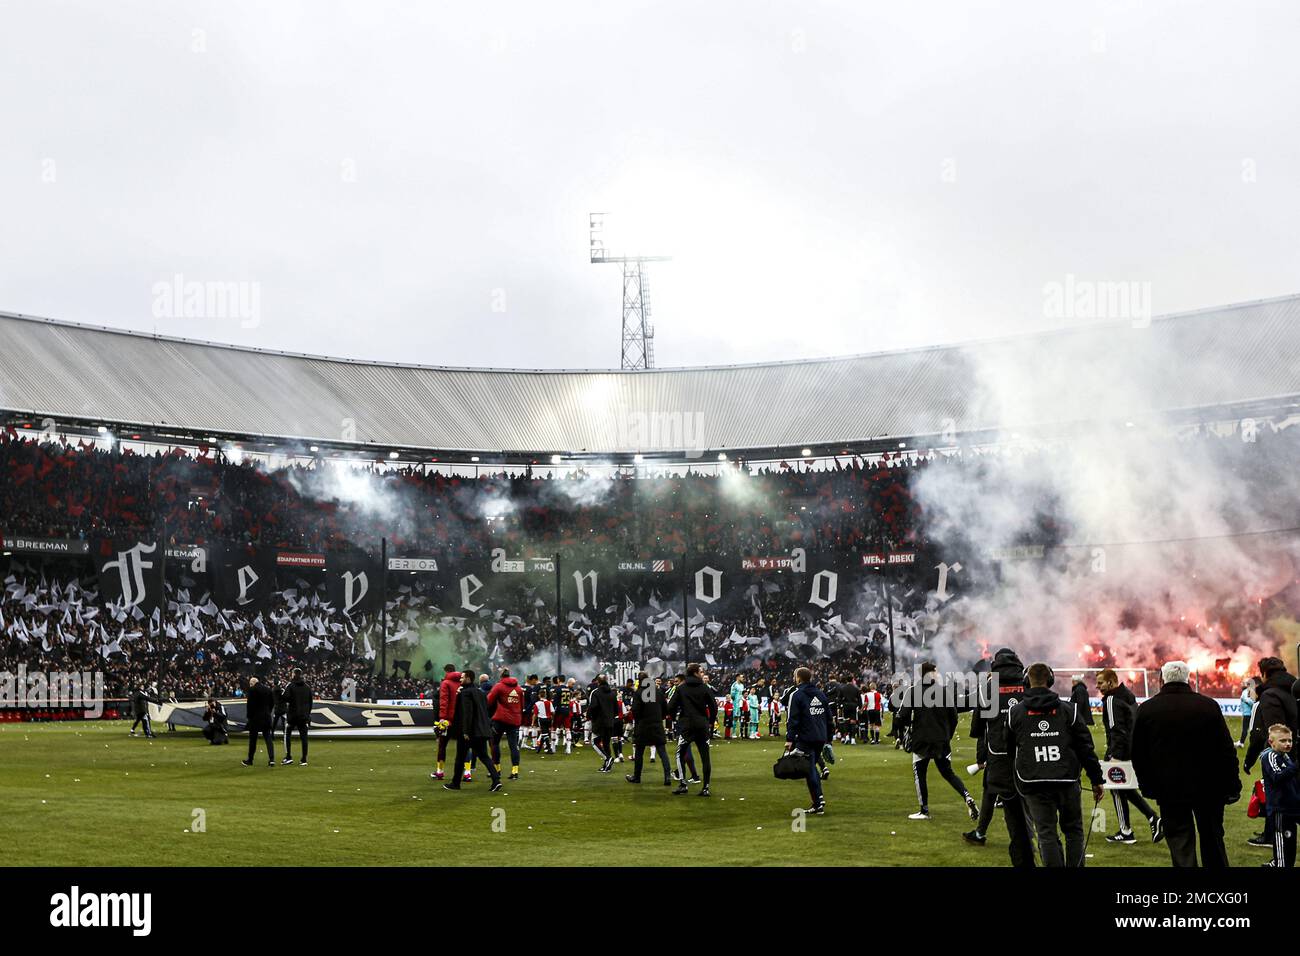 ROTTERDAM - Fireworks during the Dutch premier league match between Feyenoord and Ajax at Feyenoord Stadion de Kuip on January 22, 2023 in Rotterdam, Netherlands. ANP MAURICE VAN STEEN netherlands out - belgium out Stock Photo